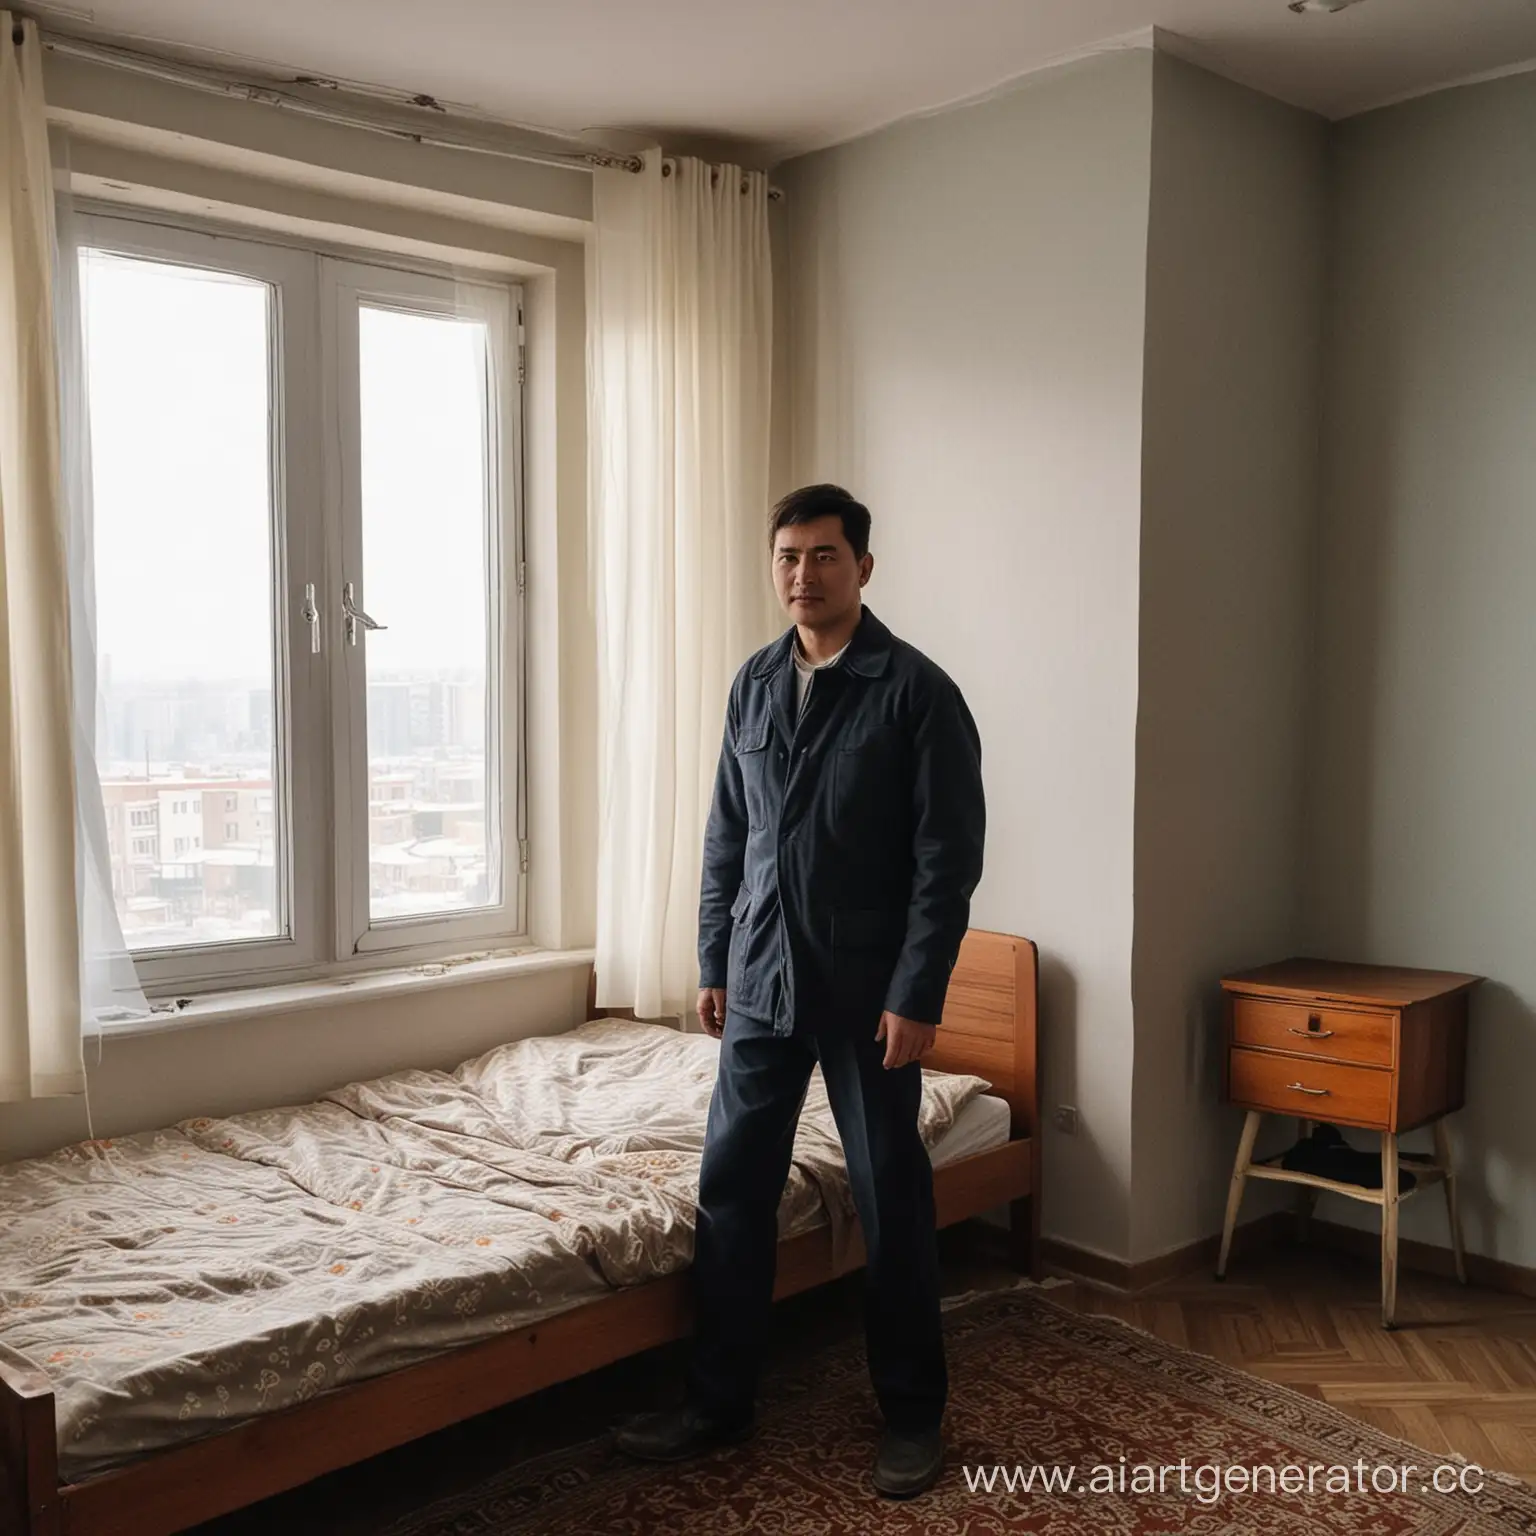 Life-in-a-Late-20th-Century-Kazakhstan-Apartment-FifthFloor-Residents-Daily-Routine